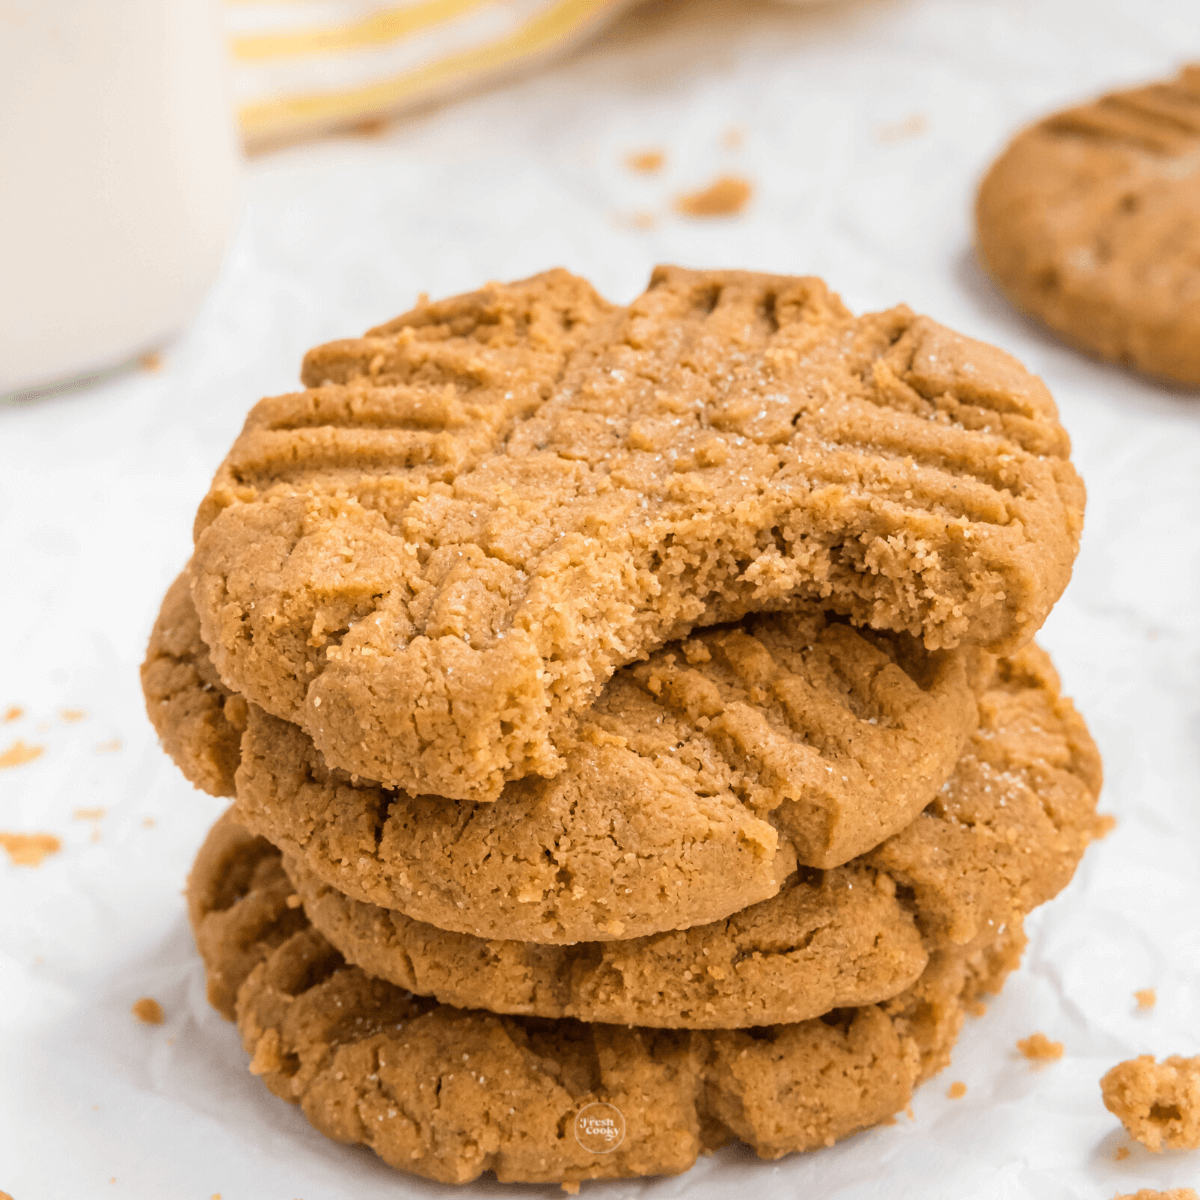 https://www.thefreshcooky.com/wp-content/uploads/2022/12/Peanut-Butter-Cookies-Square-1.png